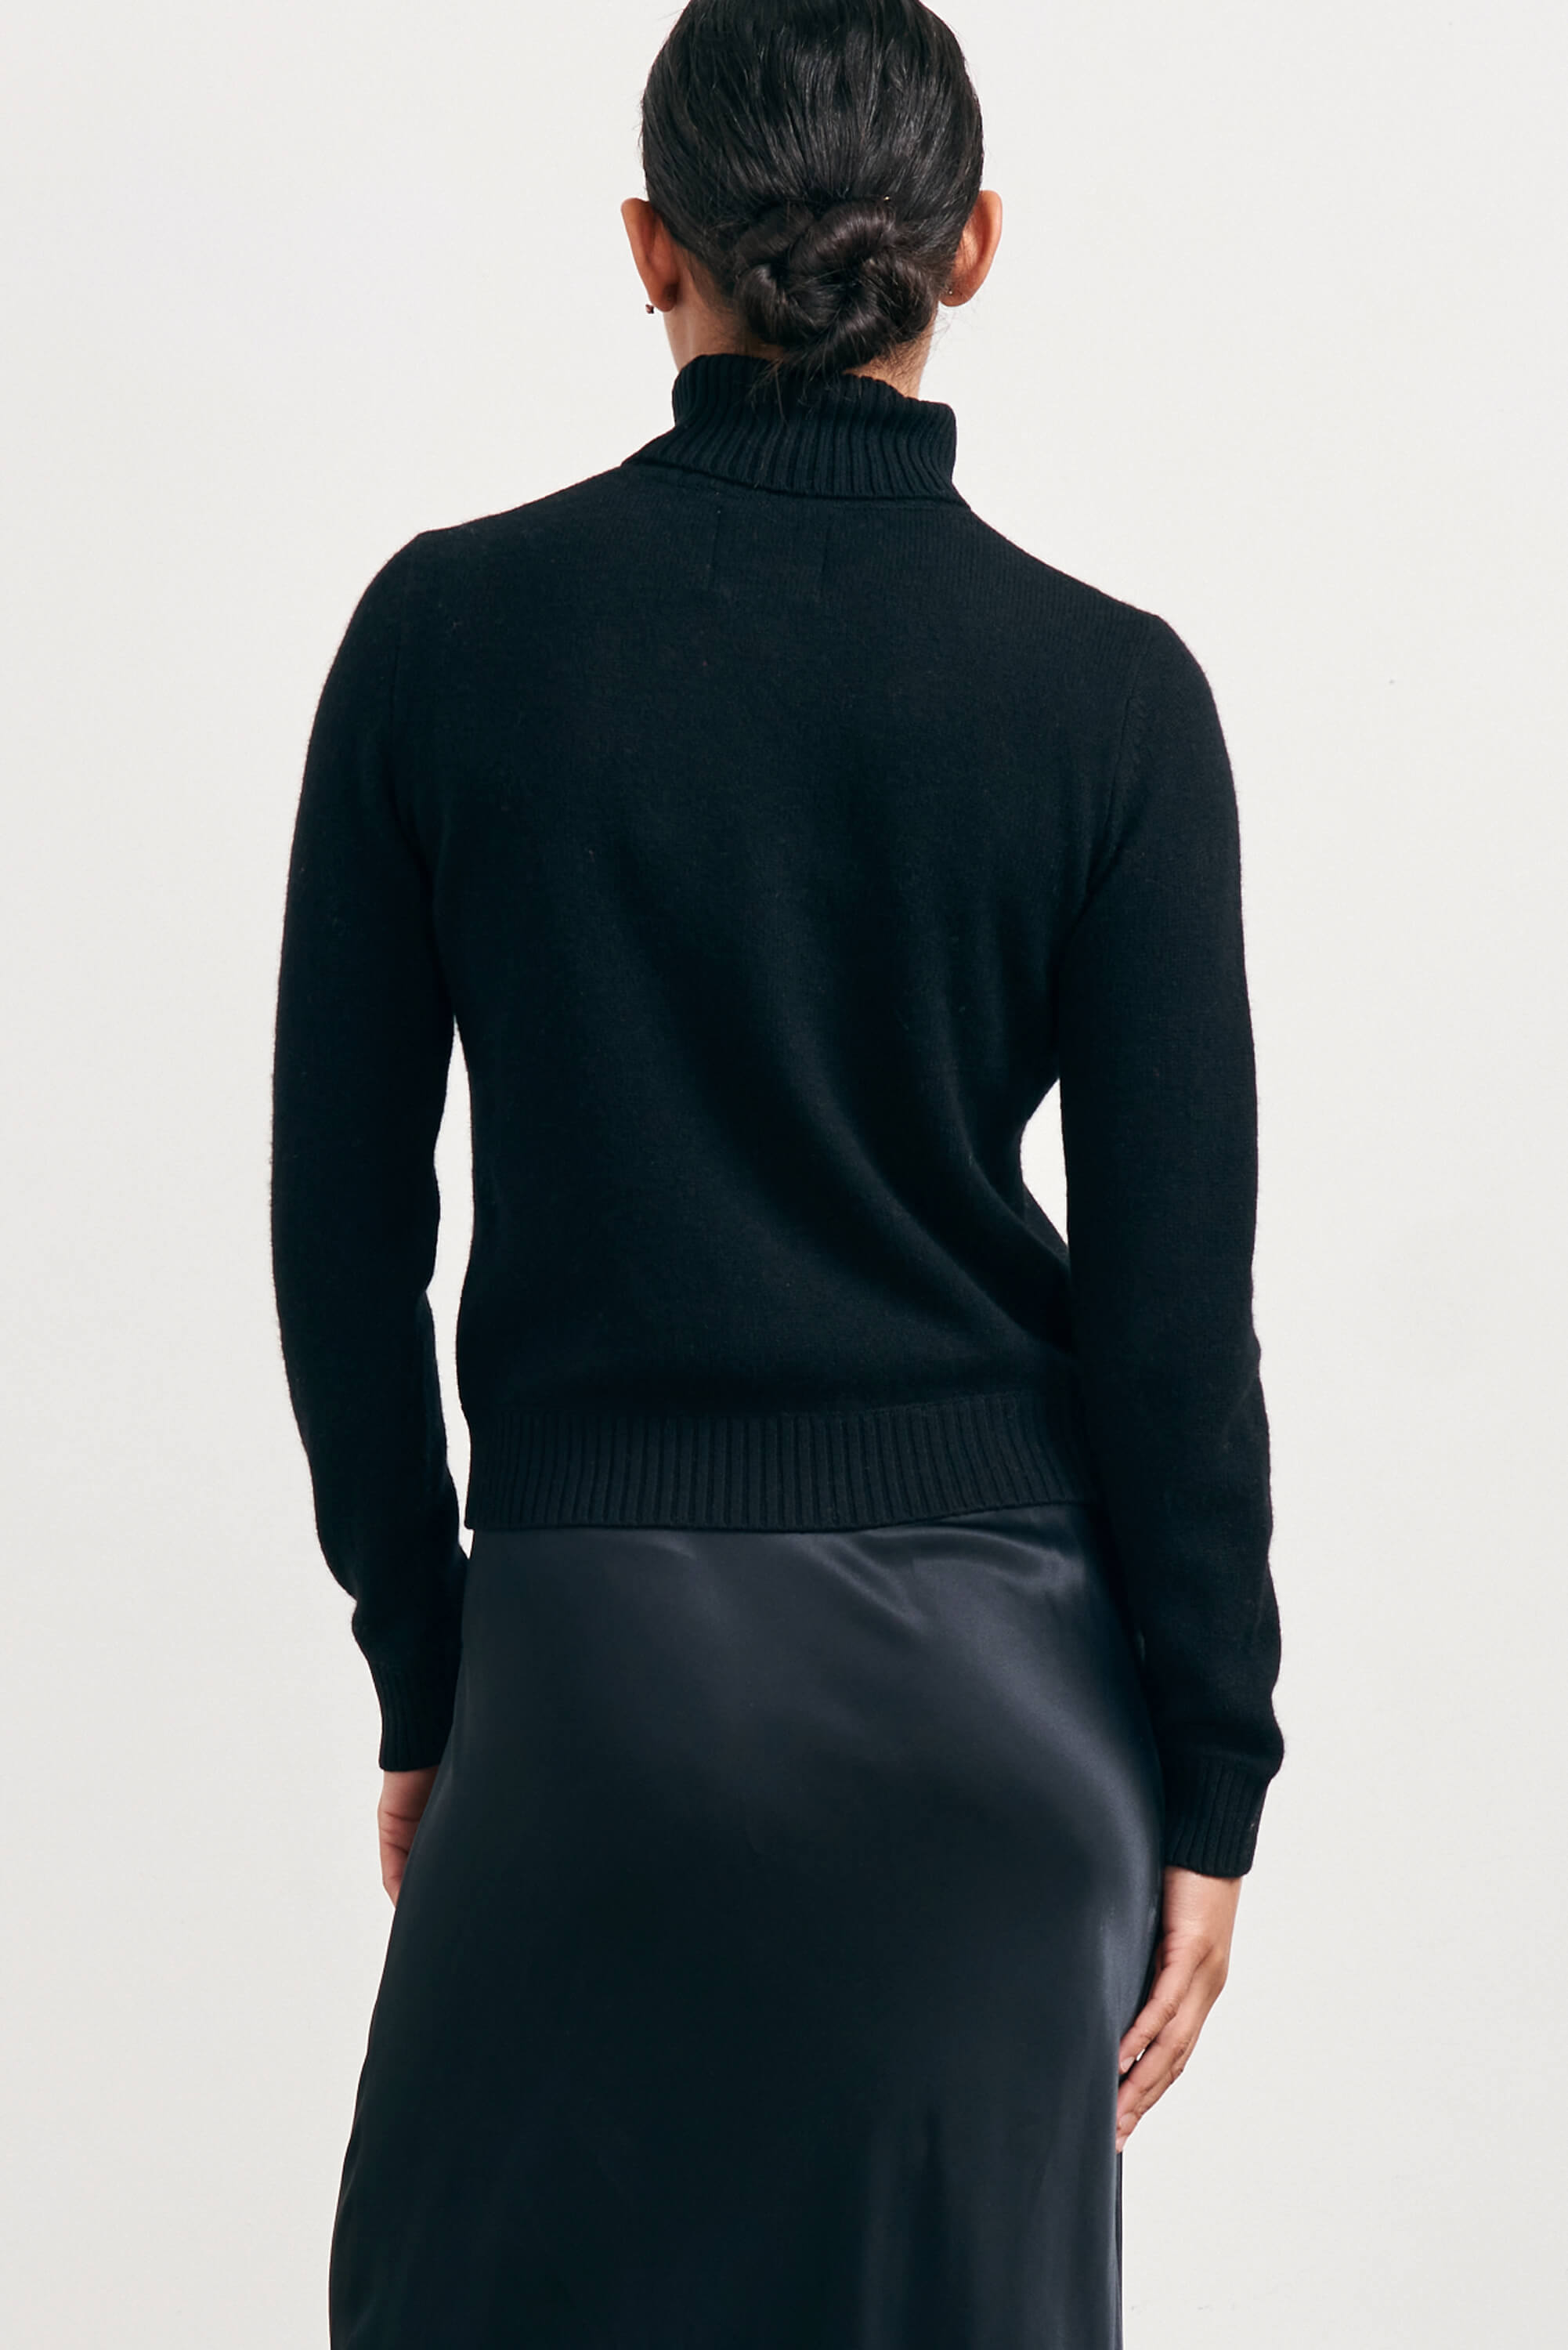 Brown haired female model wearing Jumper1234 lightweight cashmere roll neck in black facing away from the camera